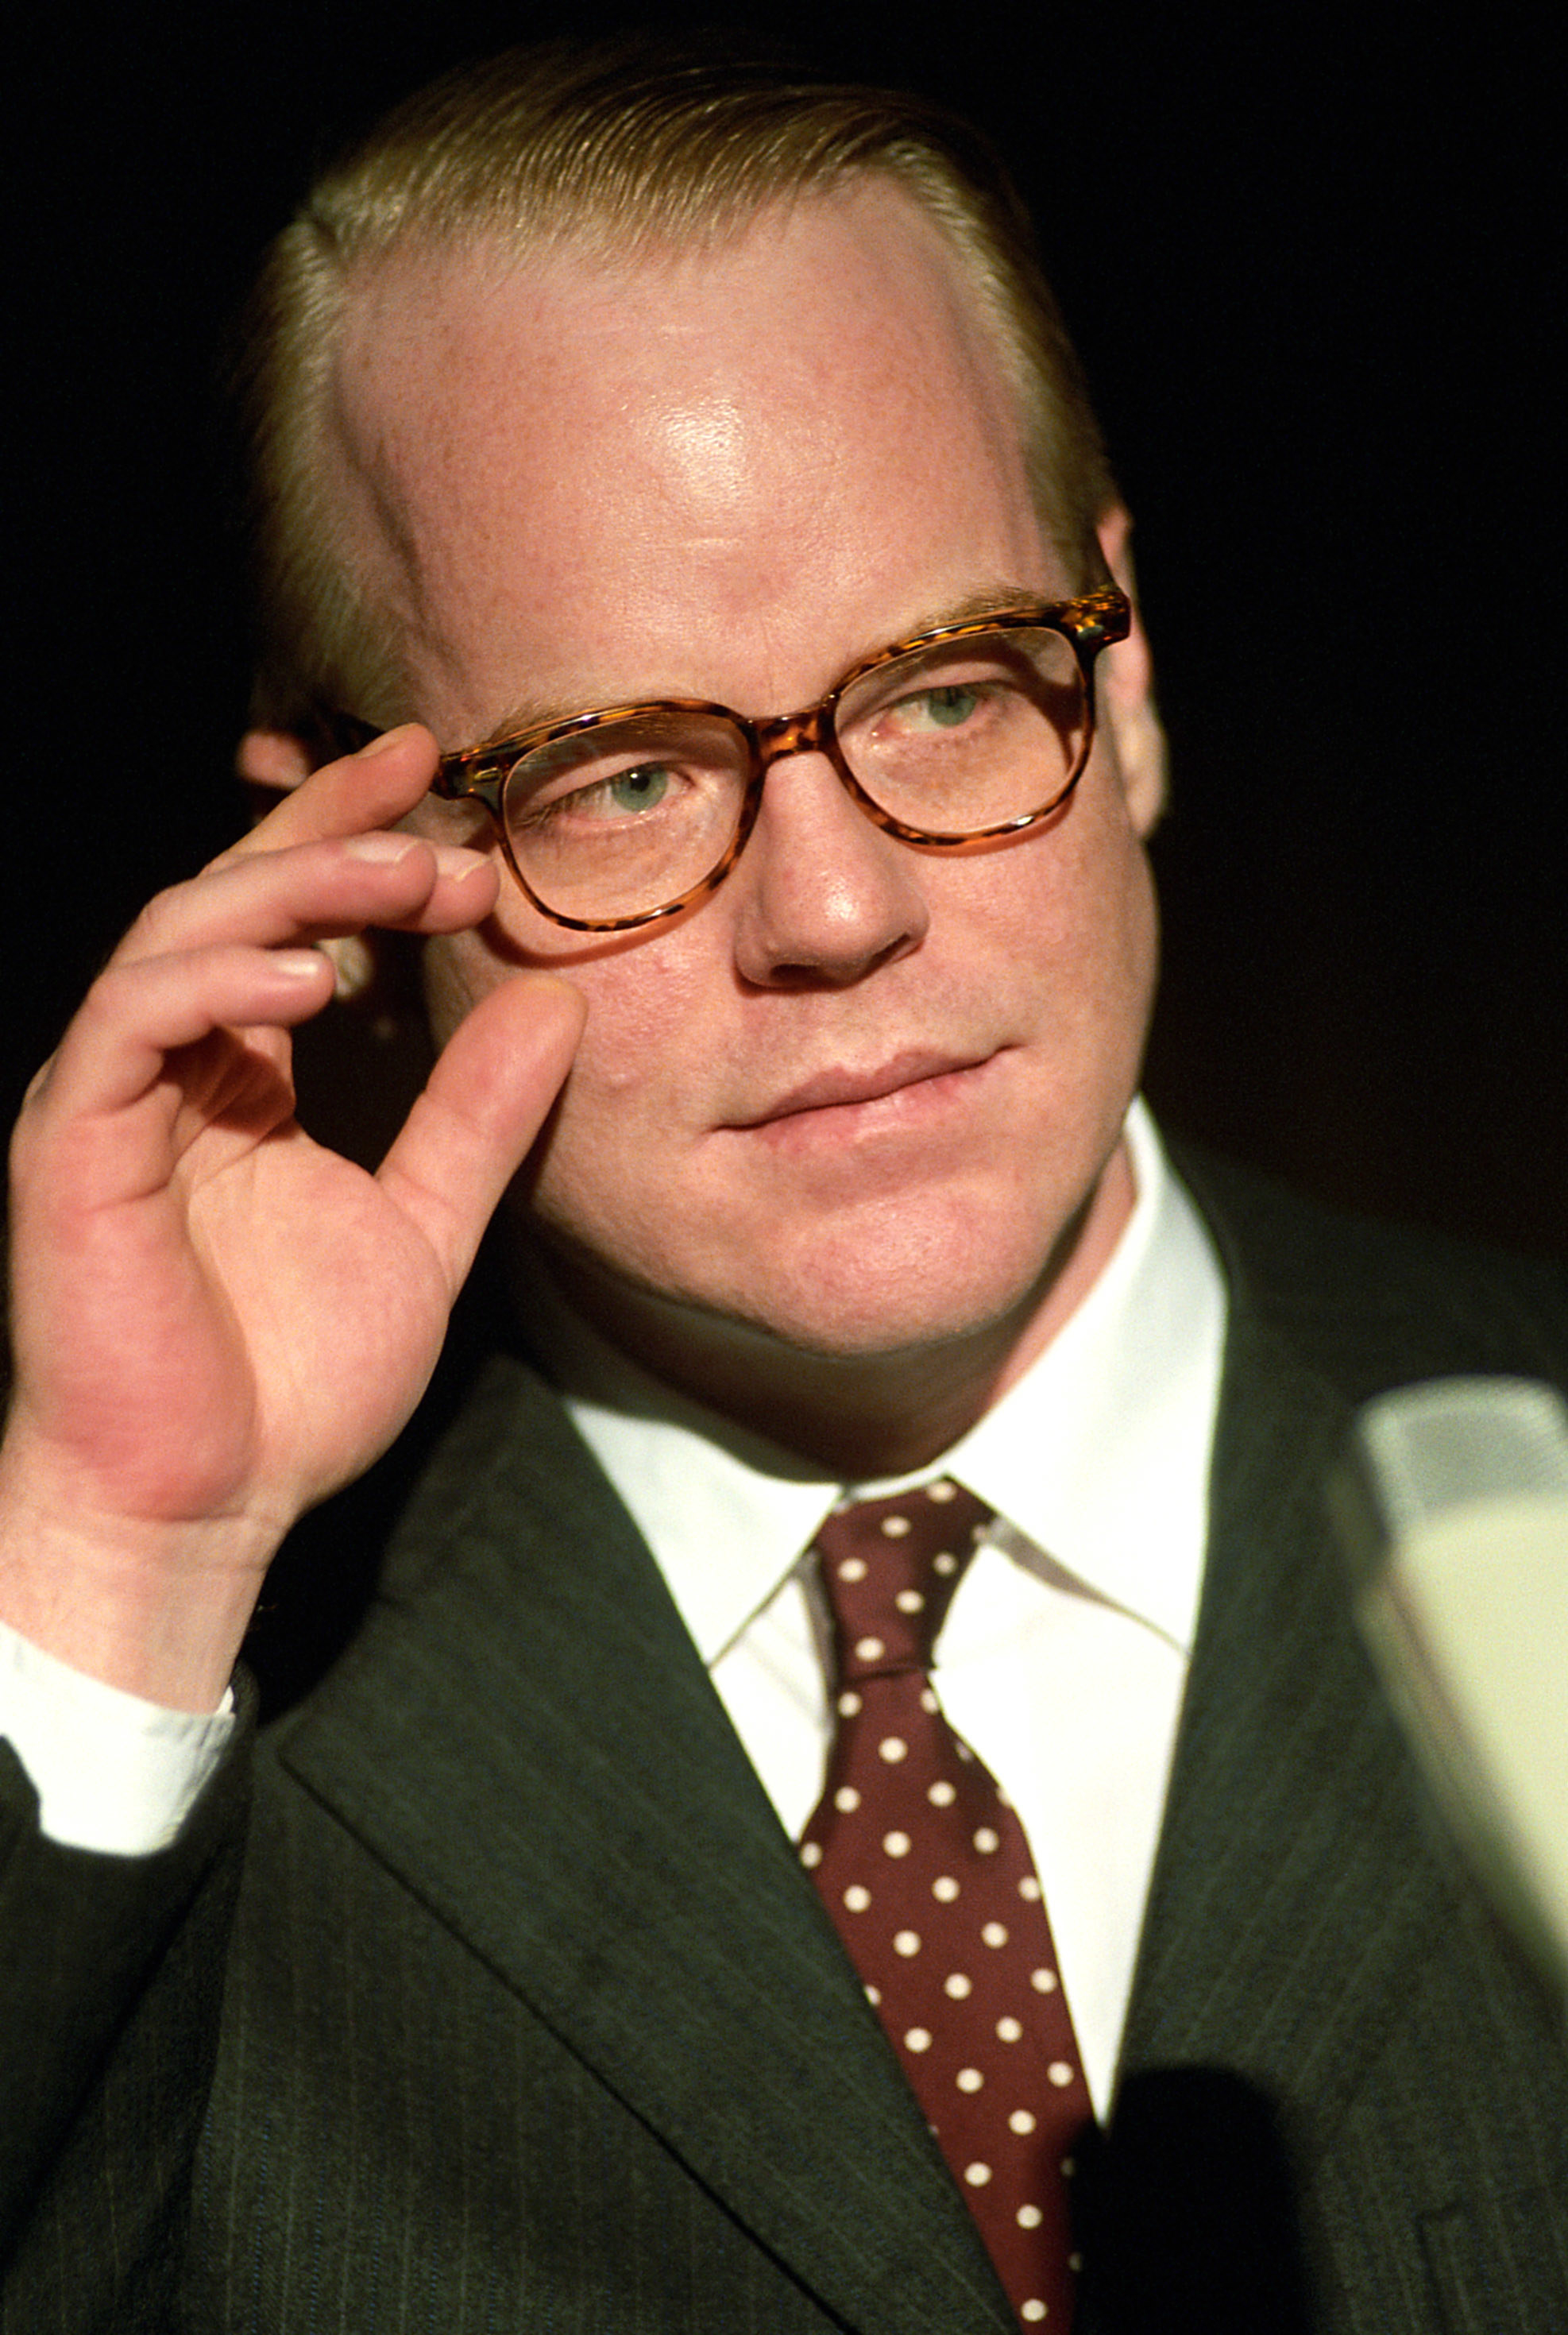 Hoffman wearing round glasses, suit and tie like Truman Capote